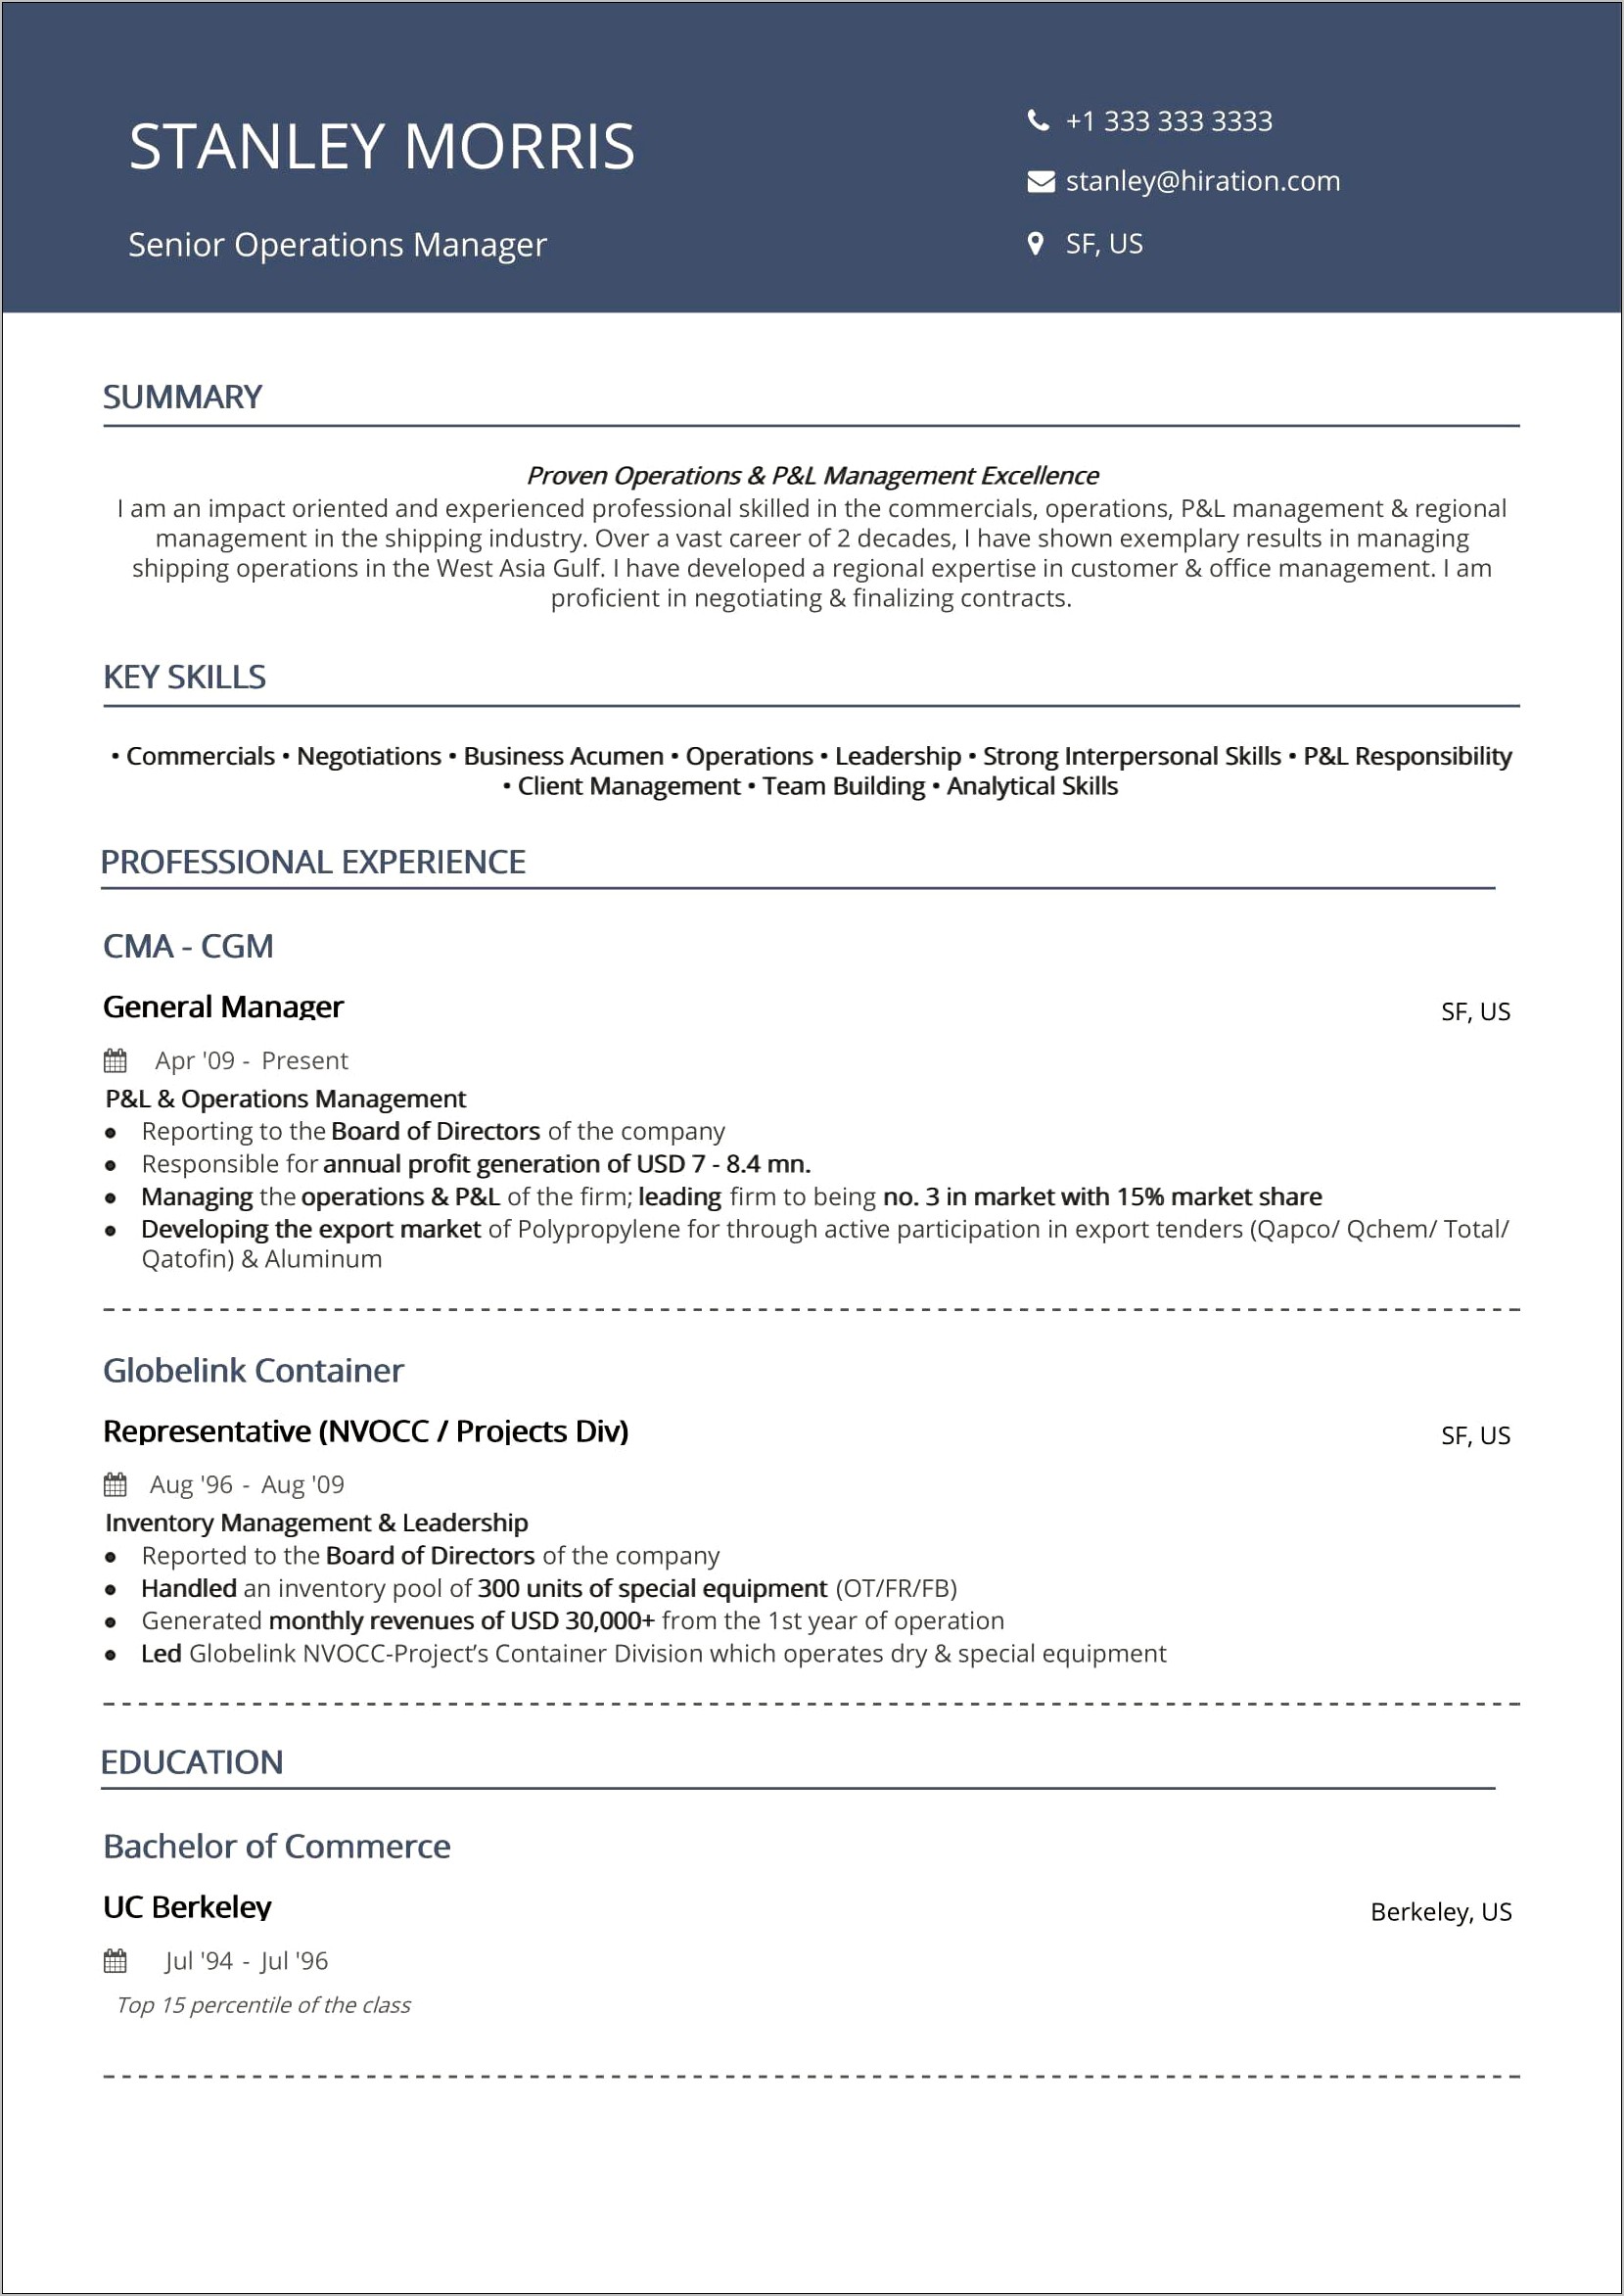 Best Format In Textedit For Resume